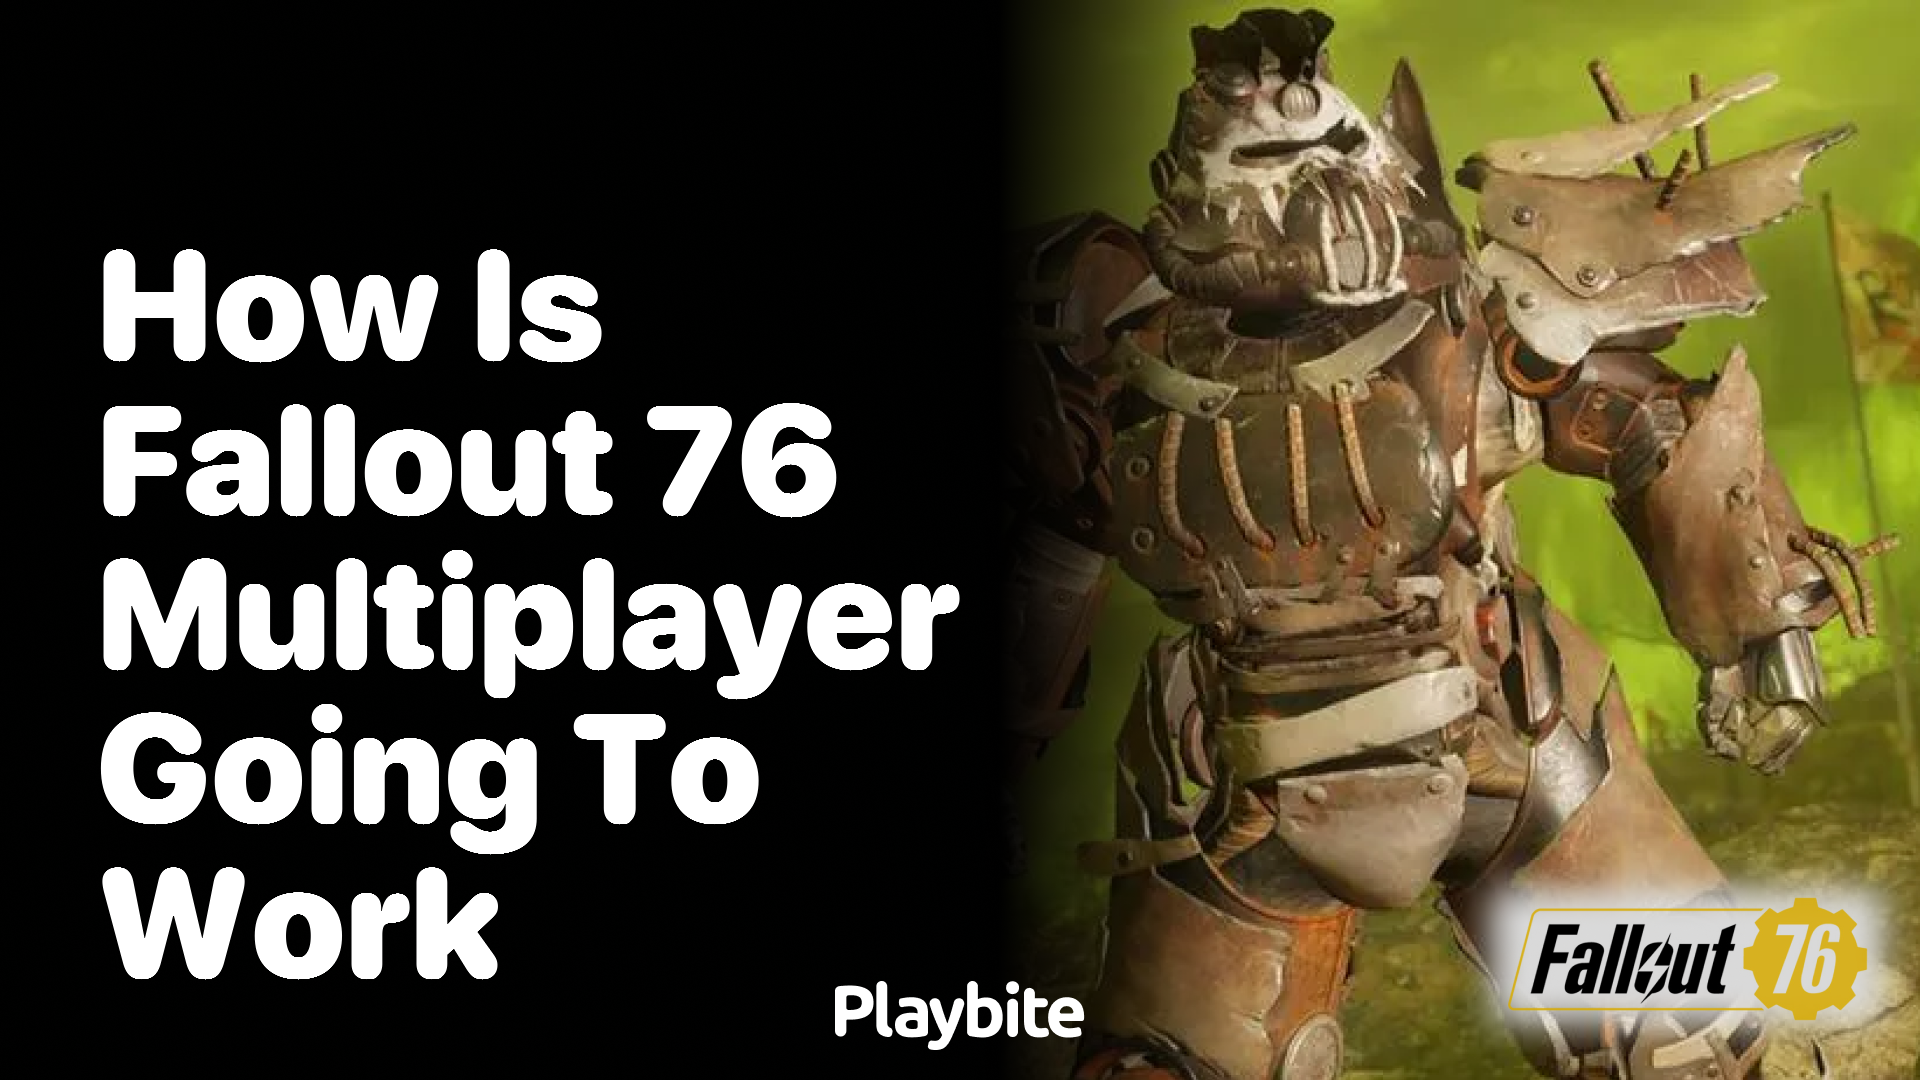 How is Fallout 76 multiplayer going to work?